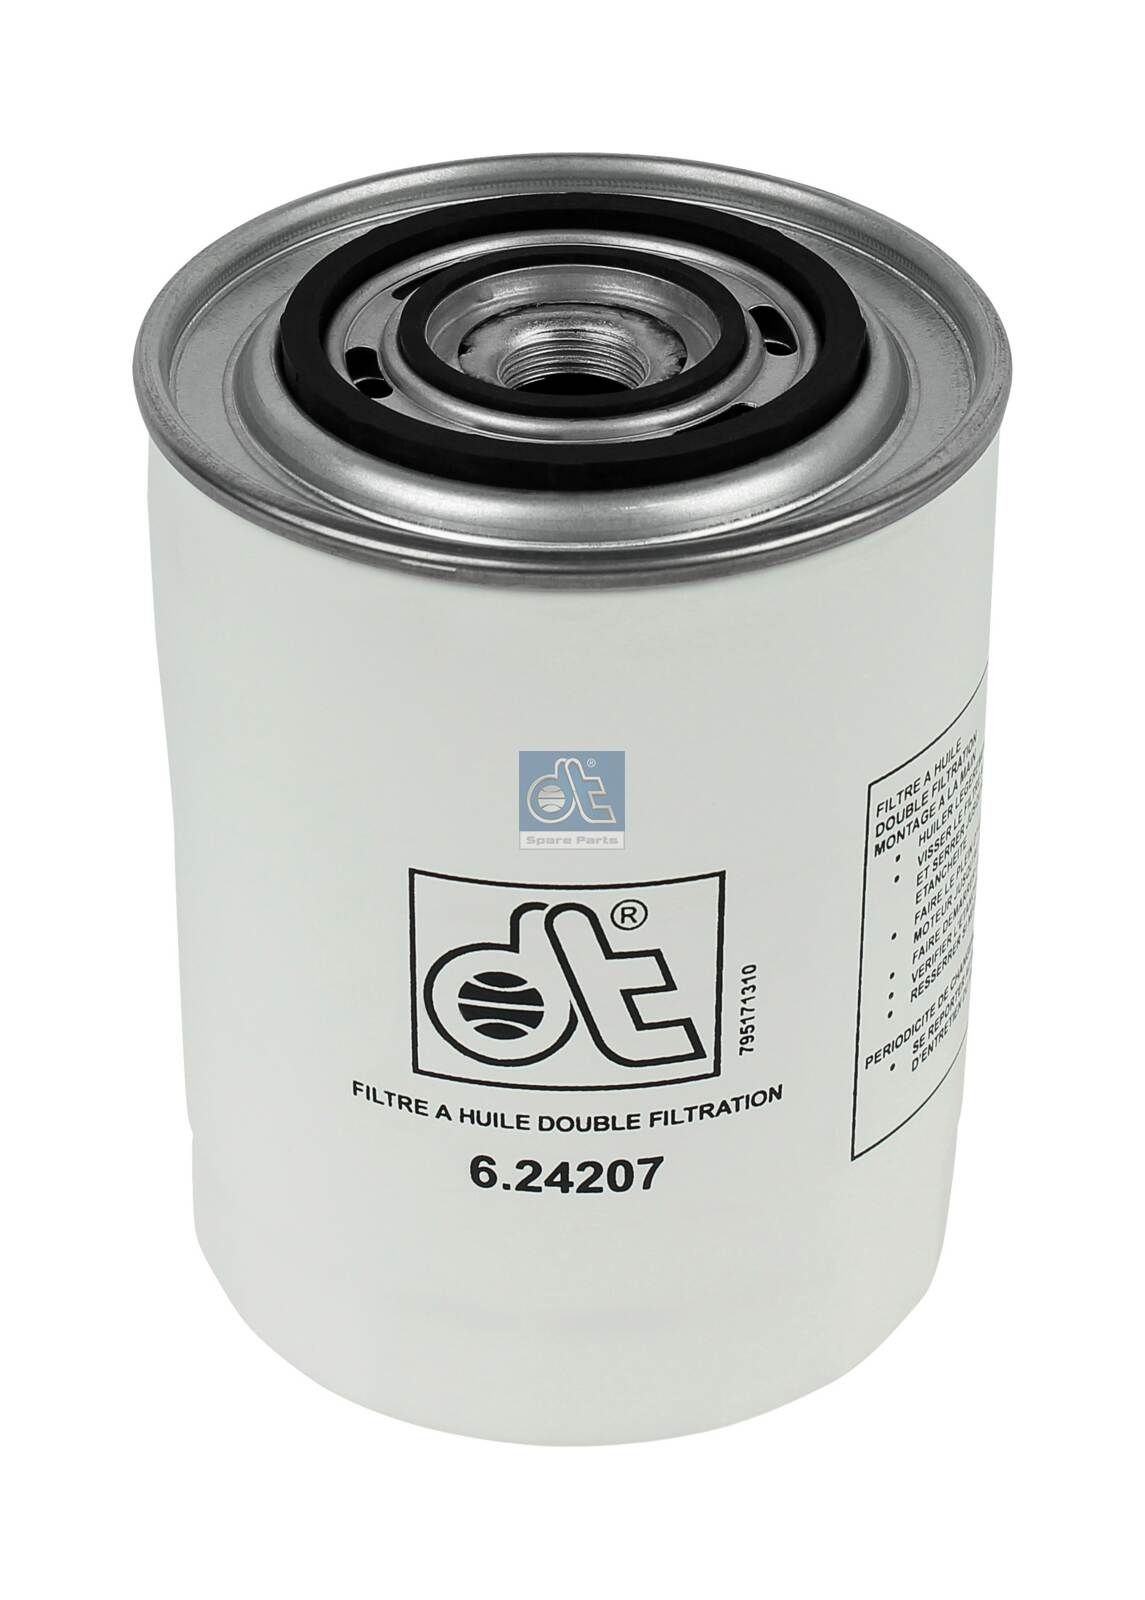 WP 1144 DT Spare Parts 6.24207 Oil filter 479 9425